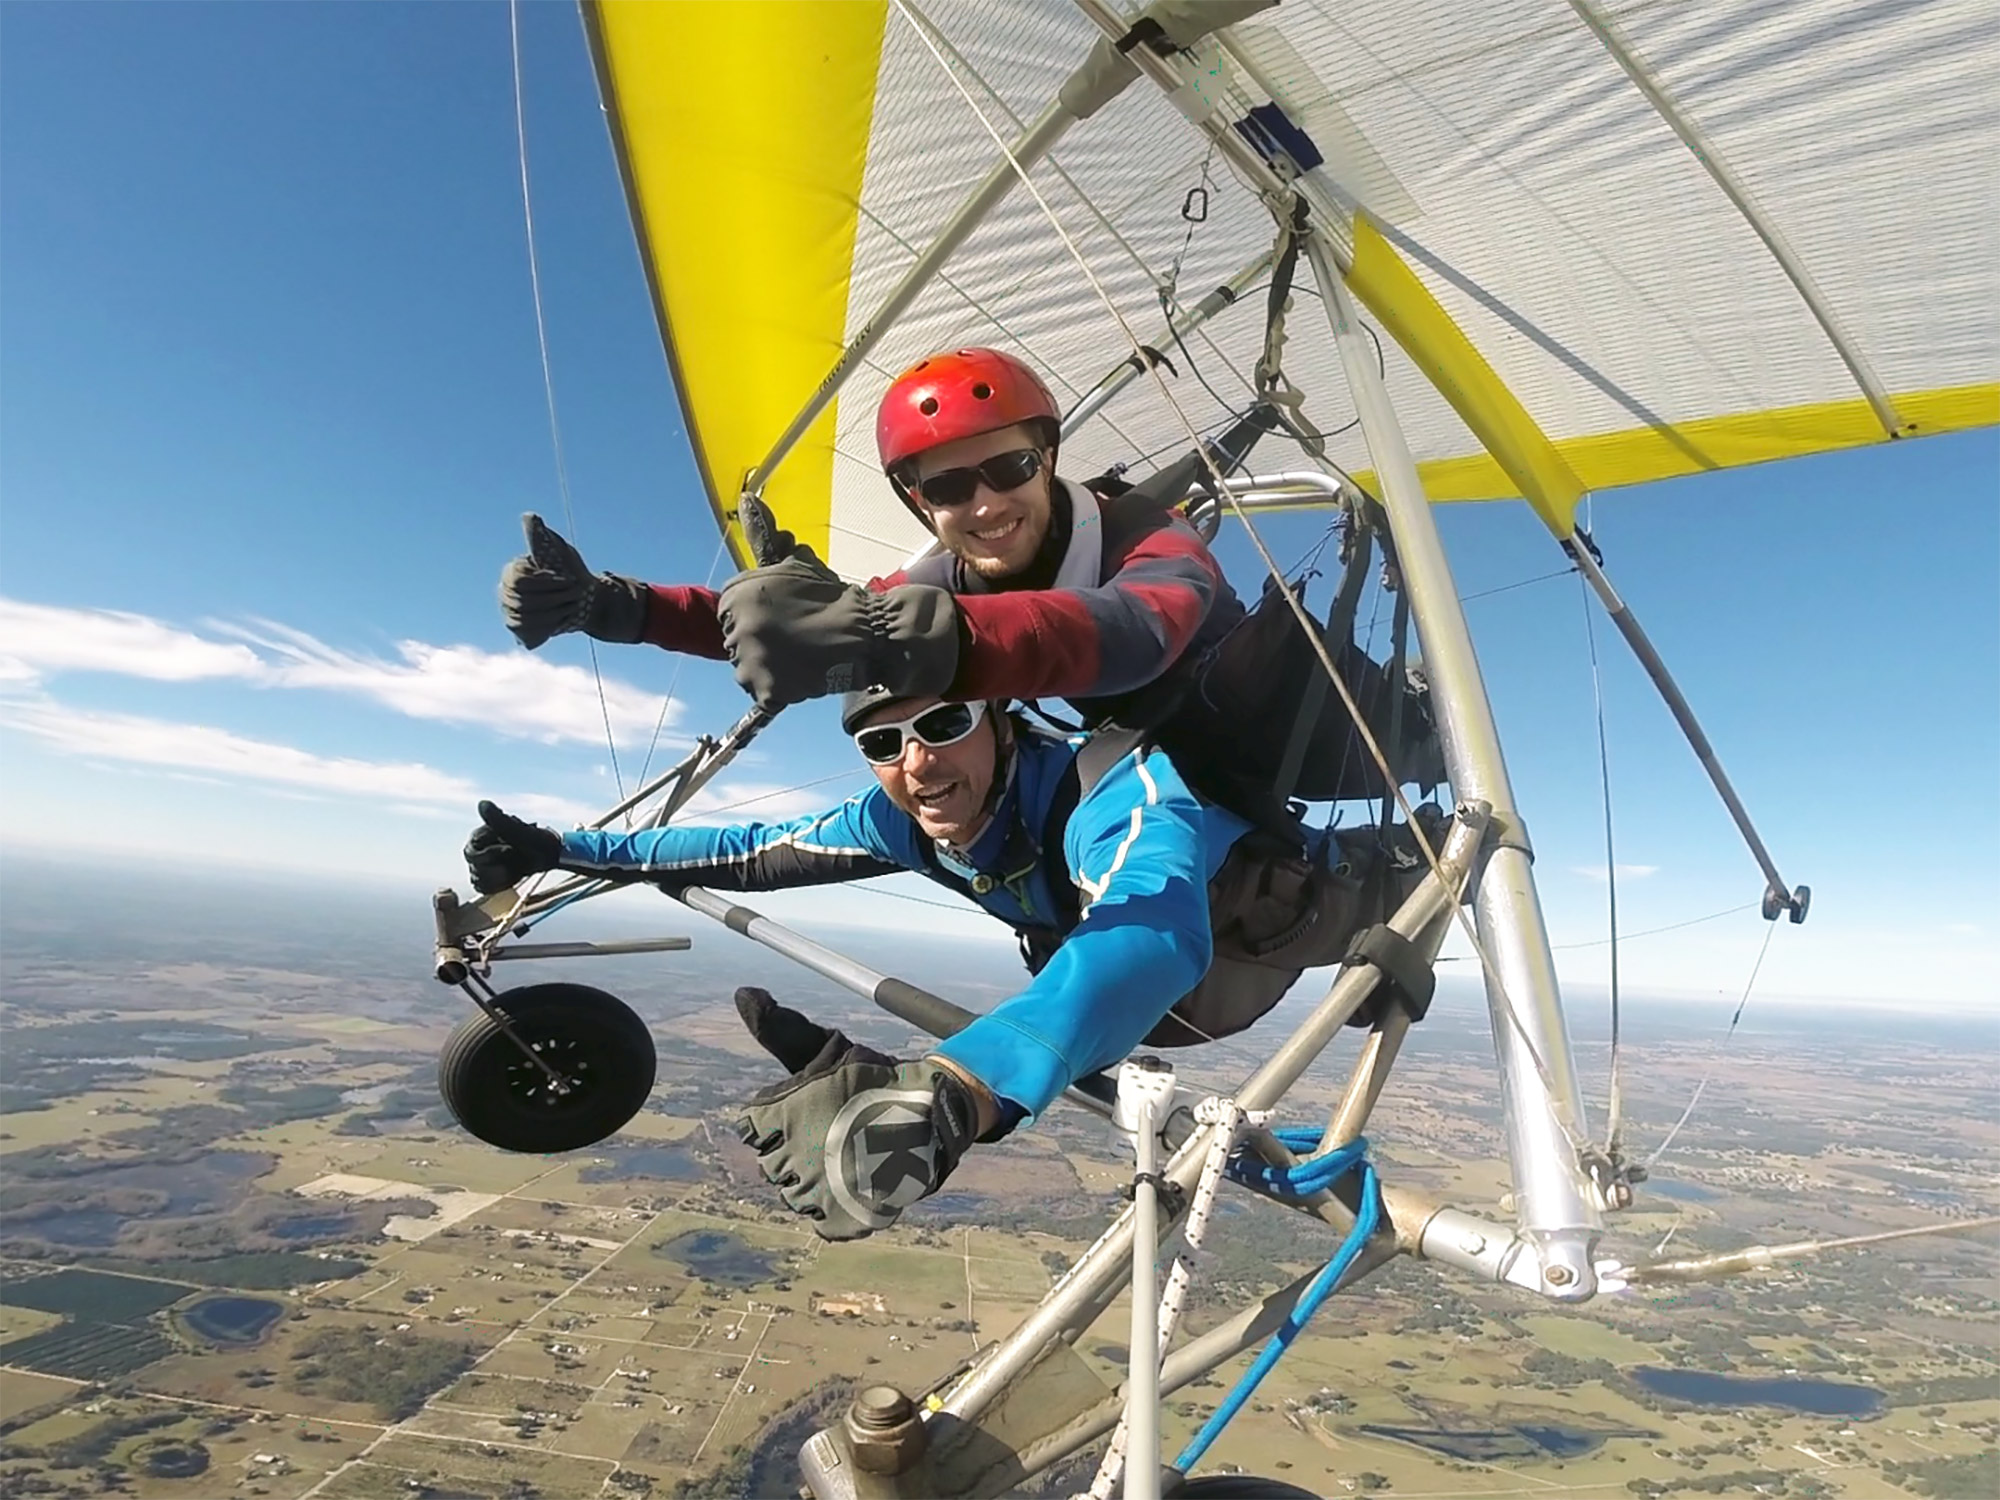 Ron Stauffer flying in a hang glider, smiling and holding two thumbs up.